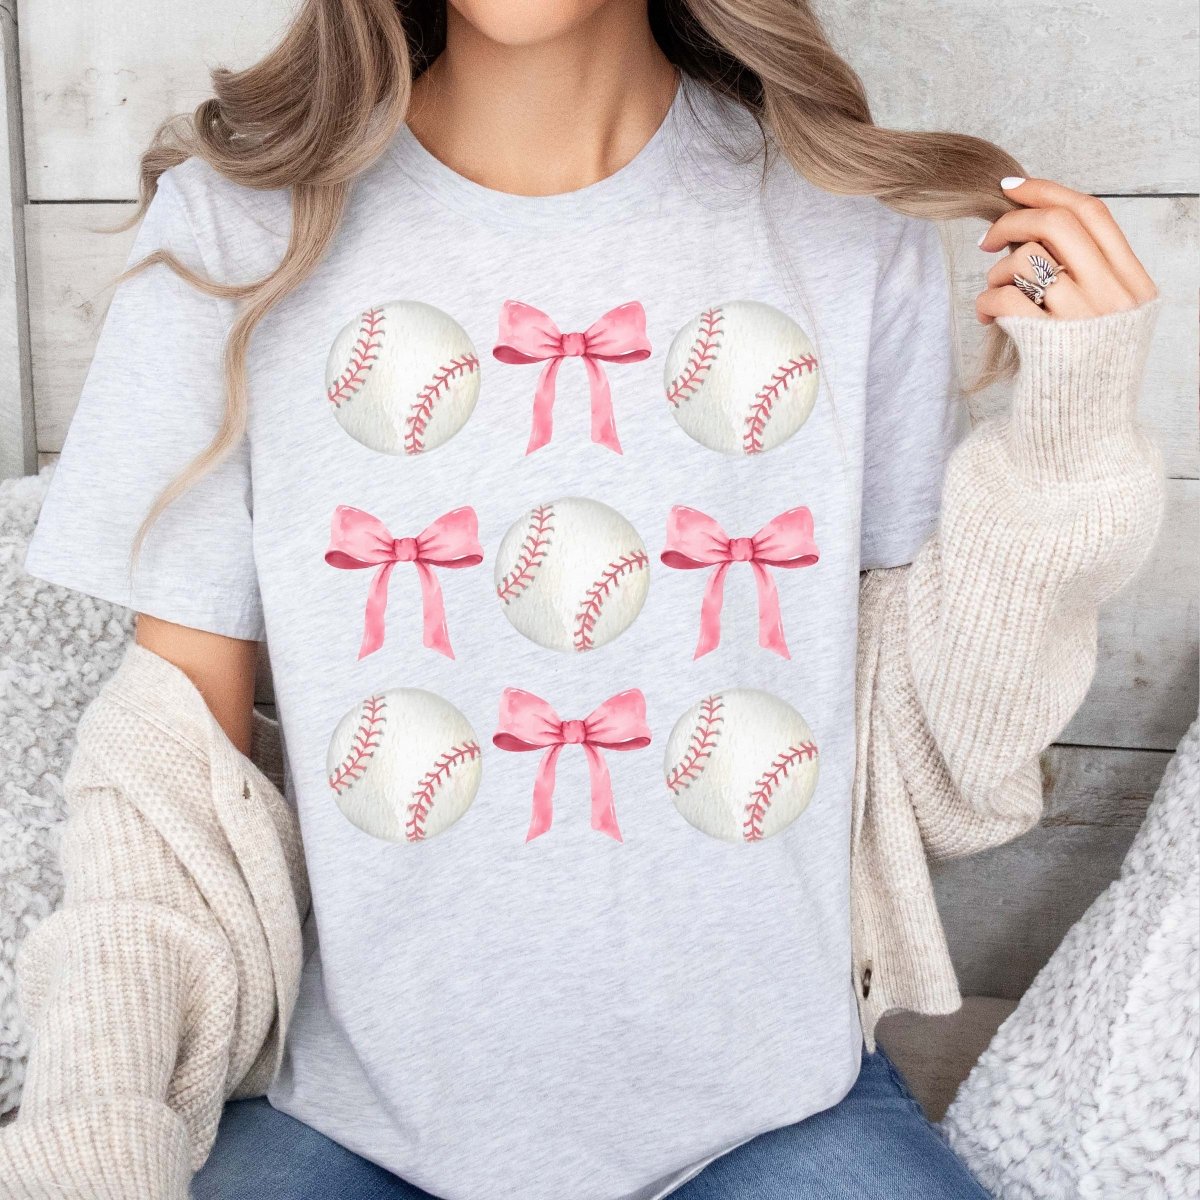 Baseballs And Bows Collage Tee - Limeberry Designs